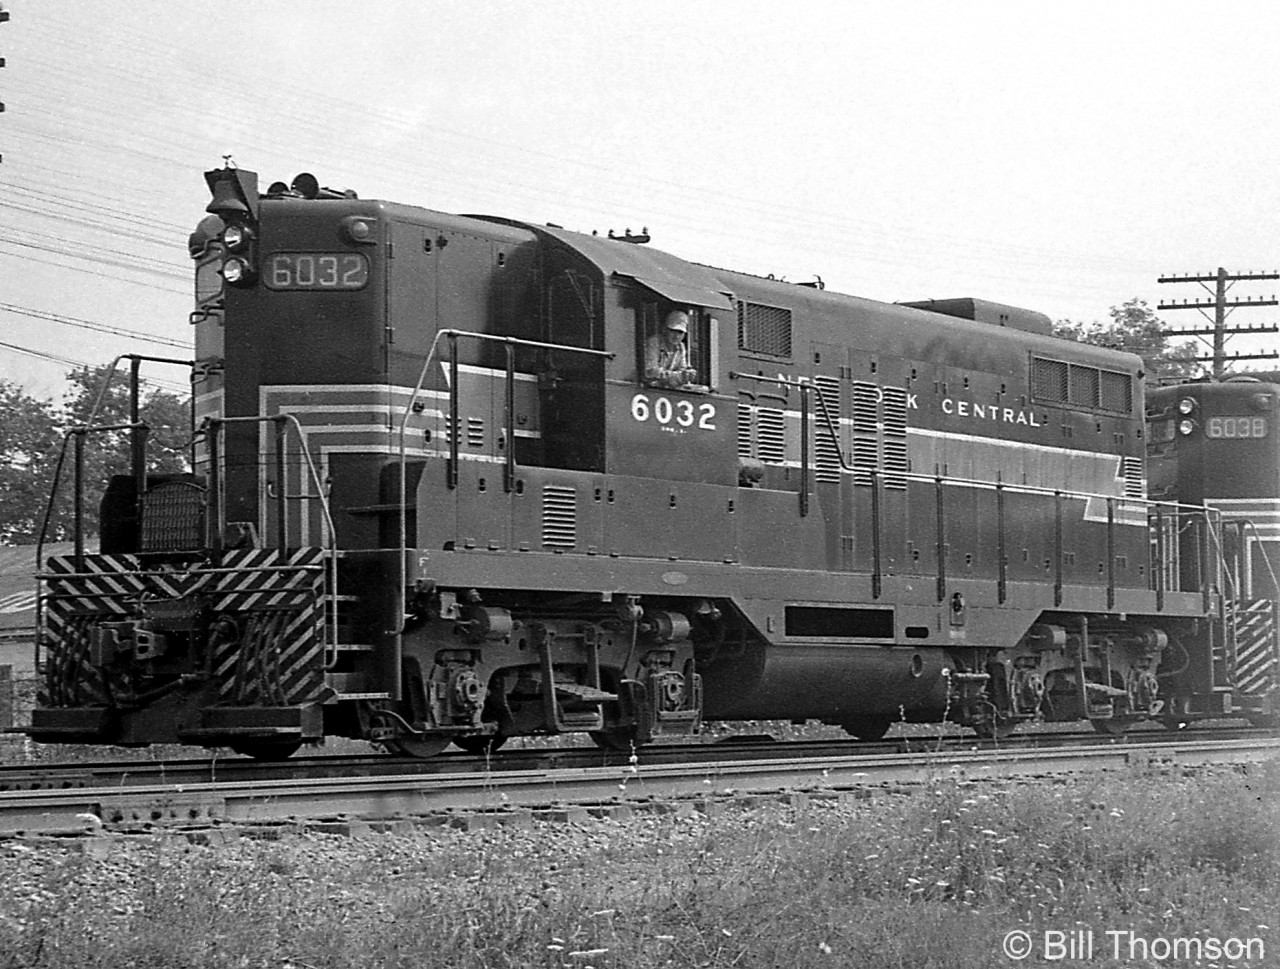 New York Central GP9 6032 is shown on CN's Oakville Sub at Port Credit, likely working on the CP/TH&B Toronto-Hamilton "Starlight" that had trackage rights over CN from Canpa to Hamilton West. Note the Automatic Train Control (ATC) "shoe" on the second axle for operation over Welland to Buffalo trackage.

NYC 6032 was one of the Canadian-built GMD units assigned to NYC's Canada Southern (CASO) operations, and would continue operating over the same territory under successors Penn Central and Conrail as their 7432. It was retired and sold to the Ashland Railway (ASRY), and became their 32.